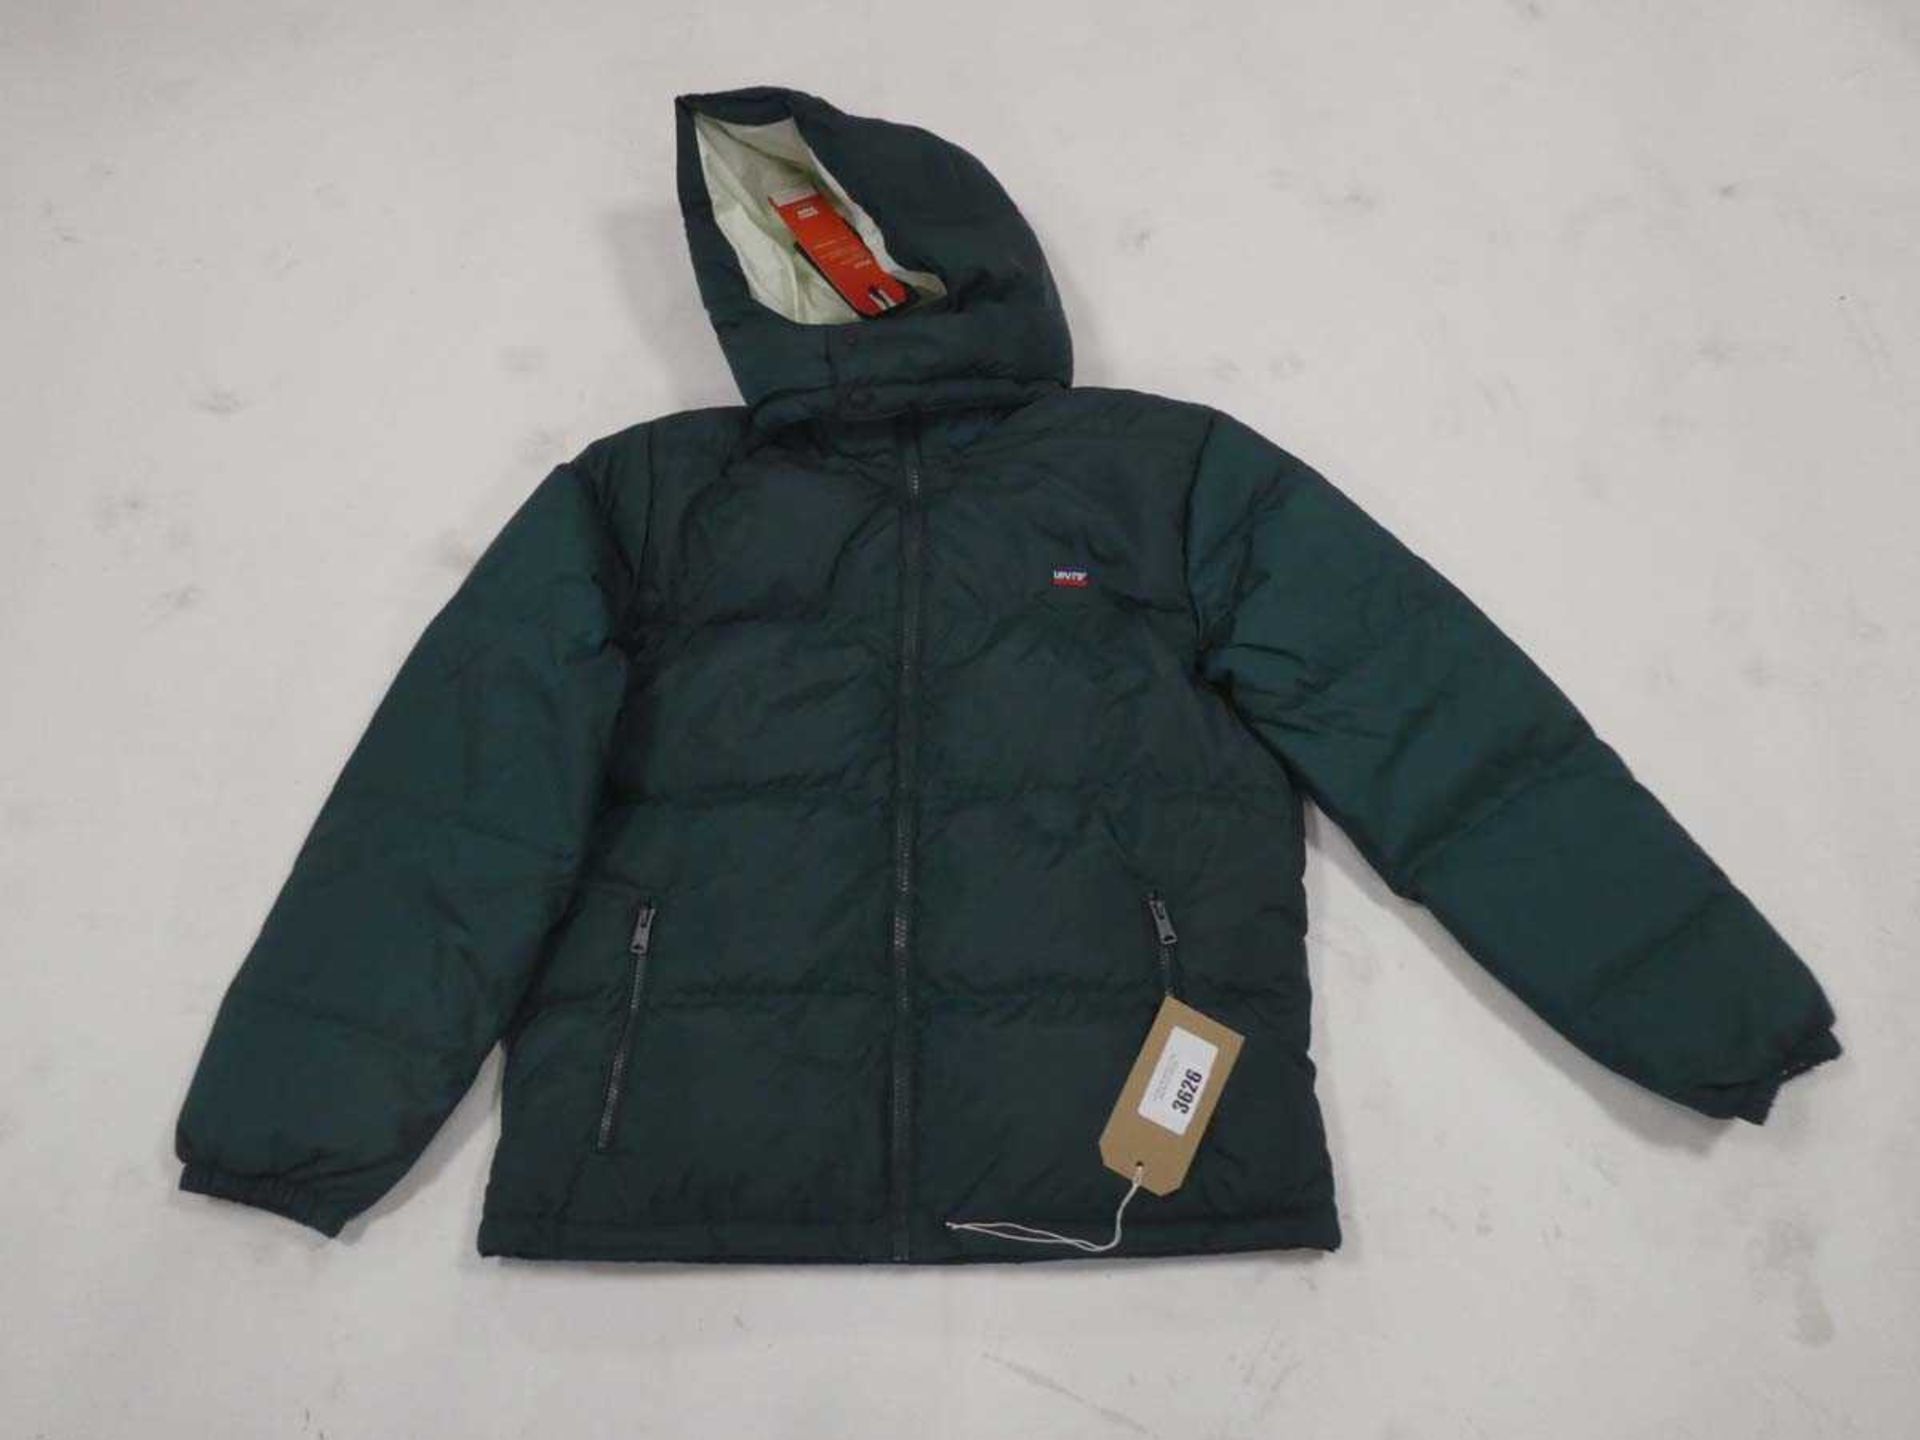 +VAT Levis green hooded feather down jacket, size medium (hanging)